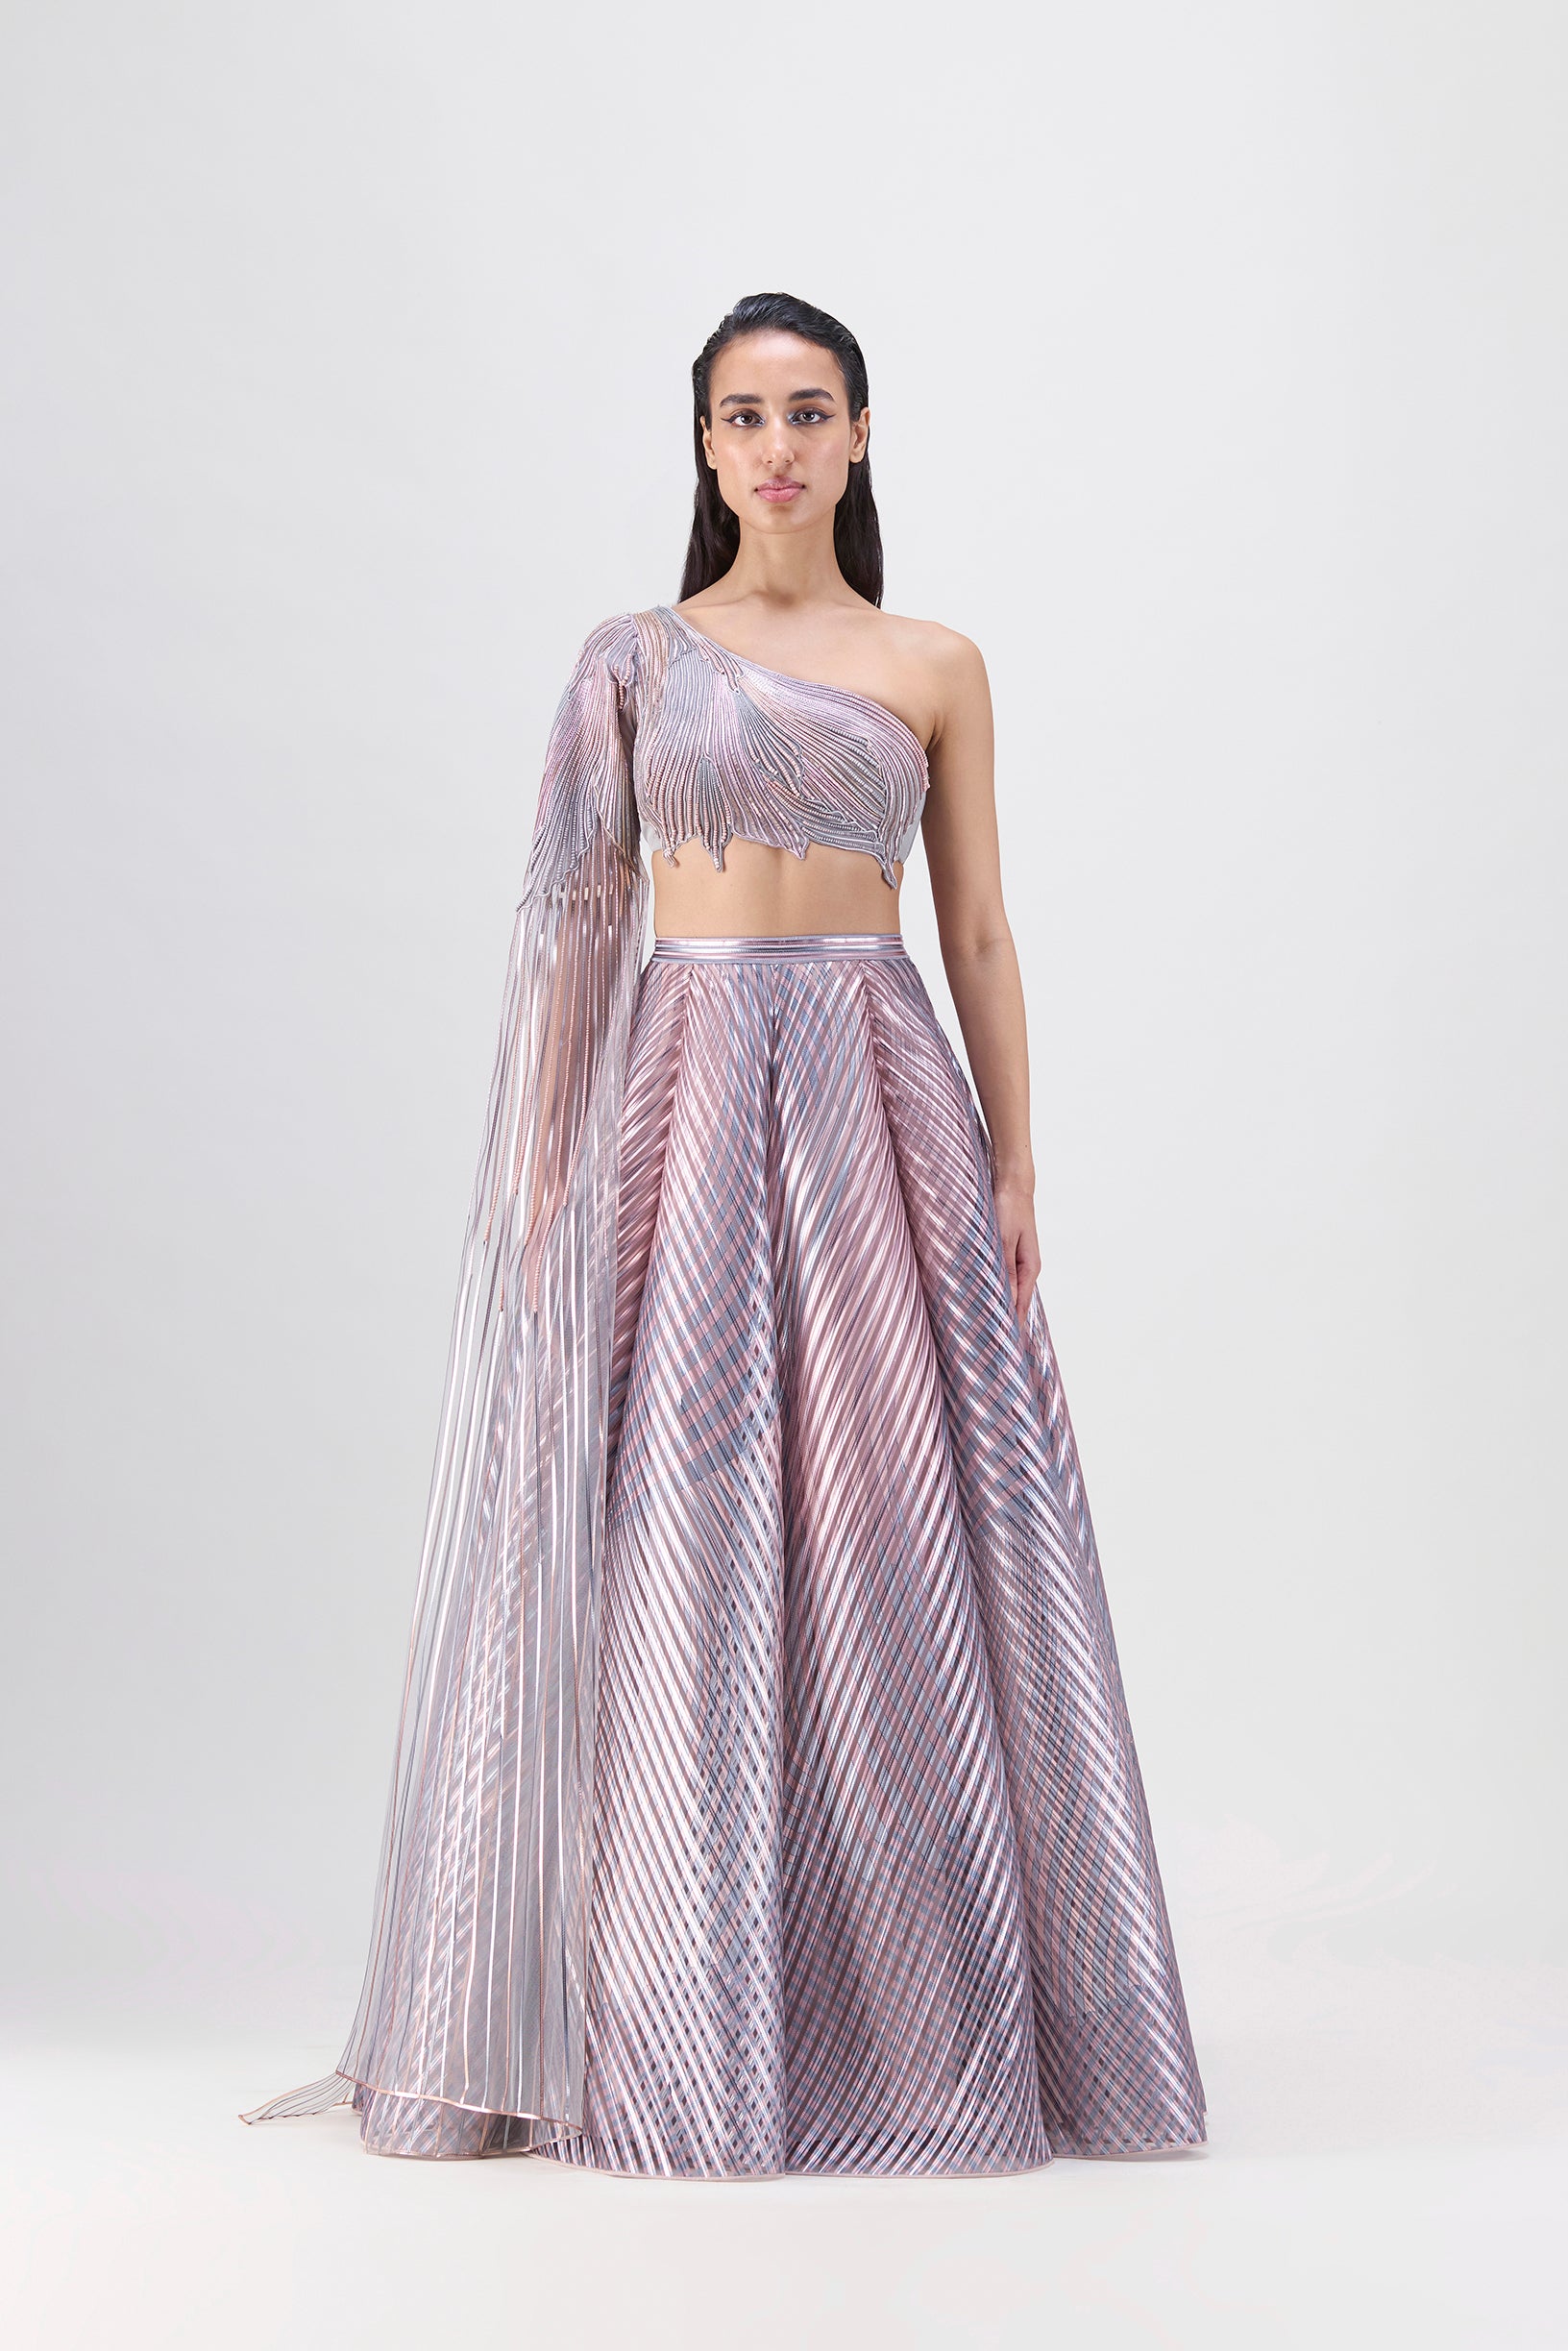 METALLIC FLUTED TULLE PRINTED SKIRT AND BEADED TOP